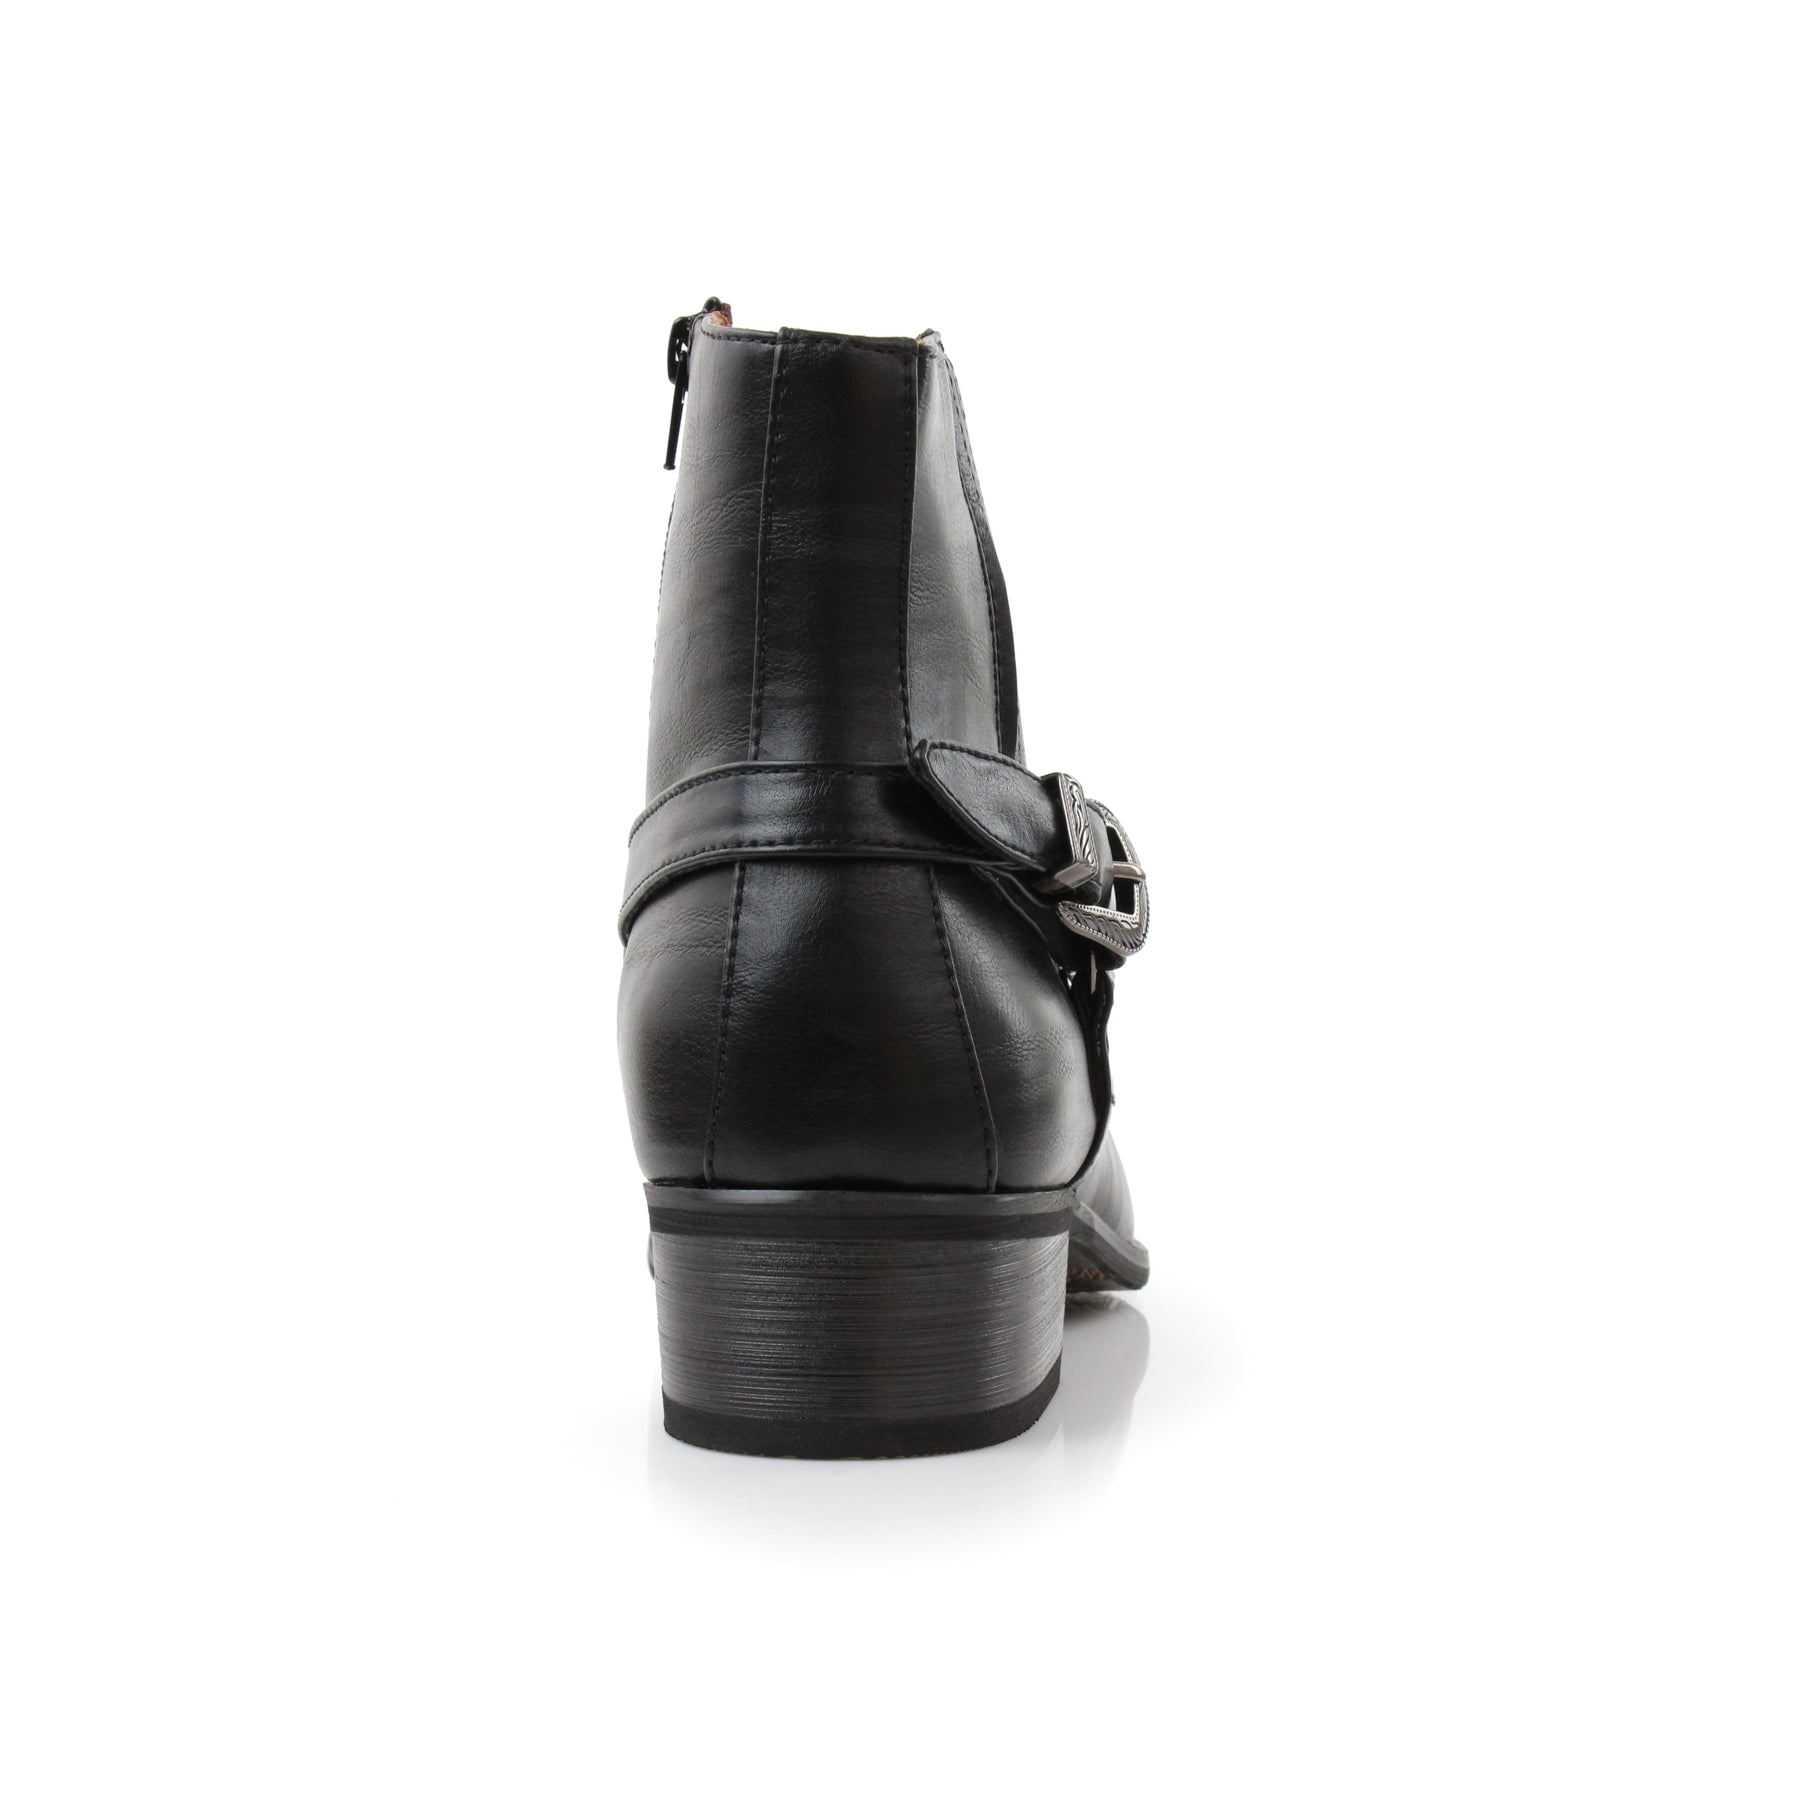 Faux Leather Cowboy Boots | Reyes by Ferro Aldo | Conal Footwear | Back Angle View